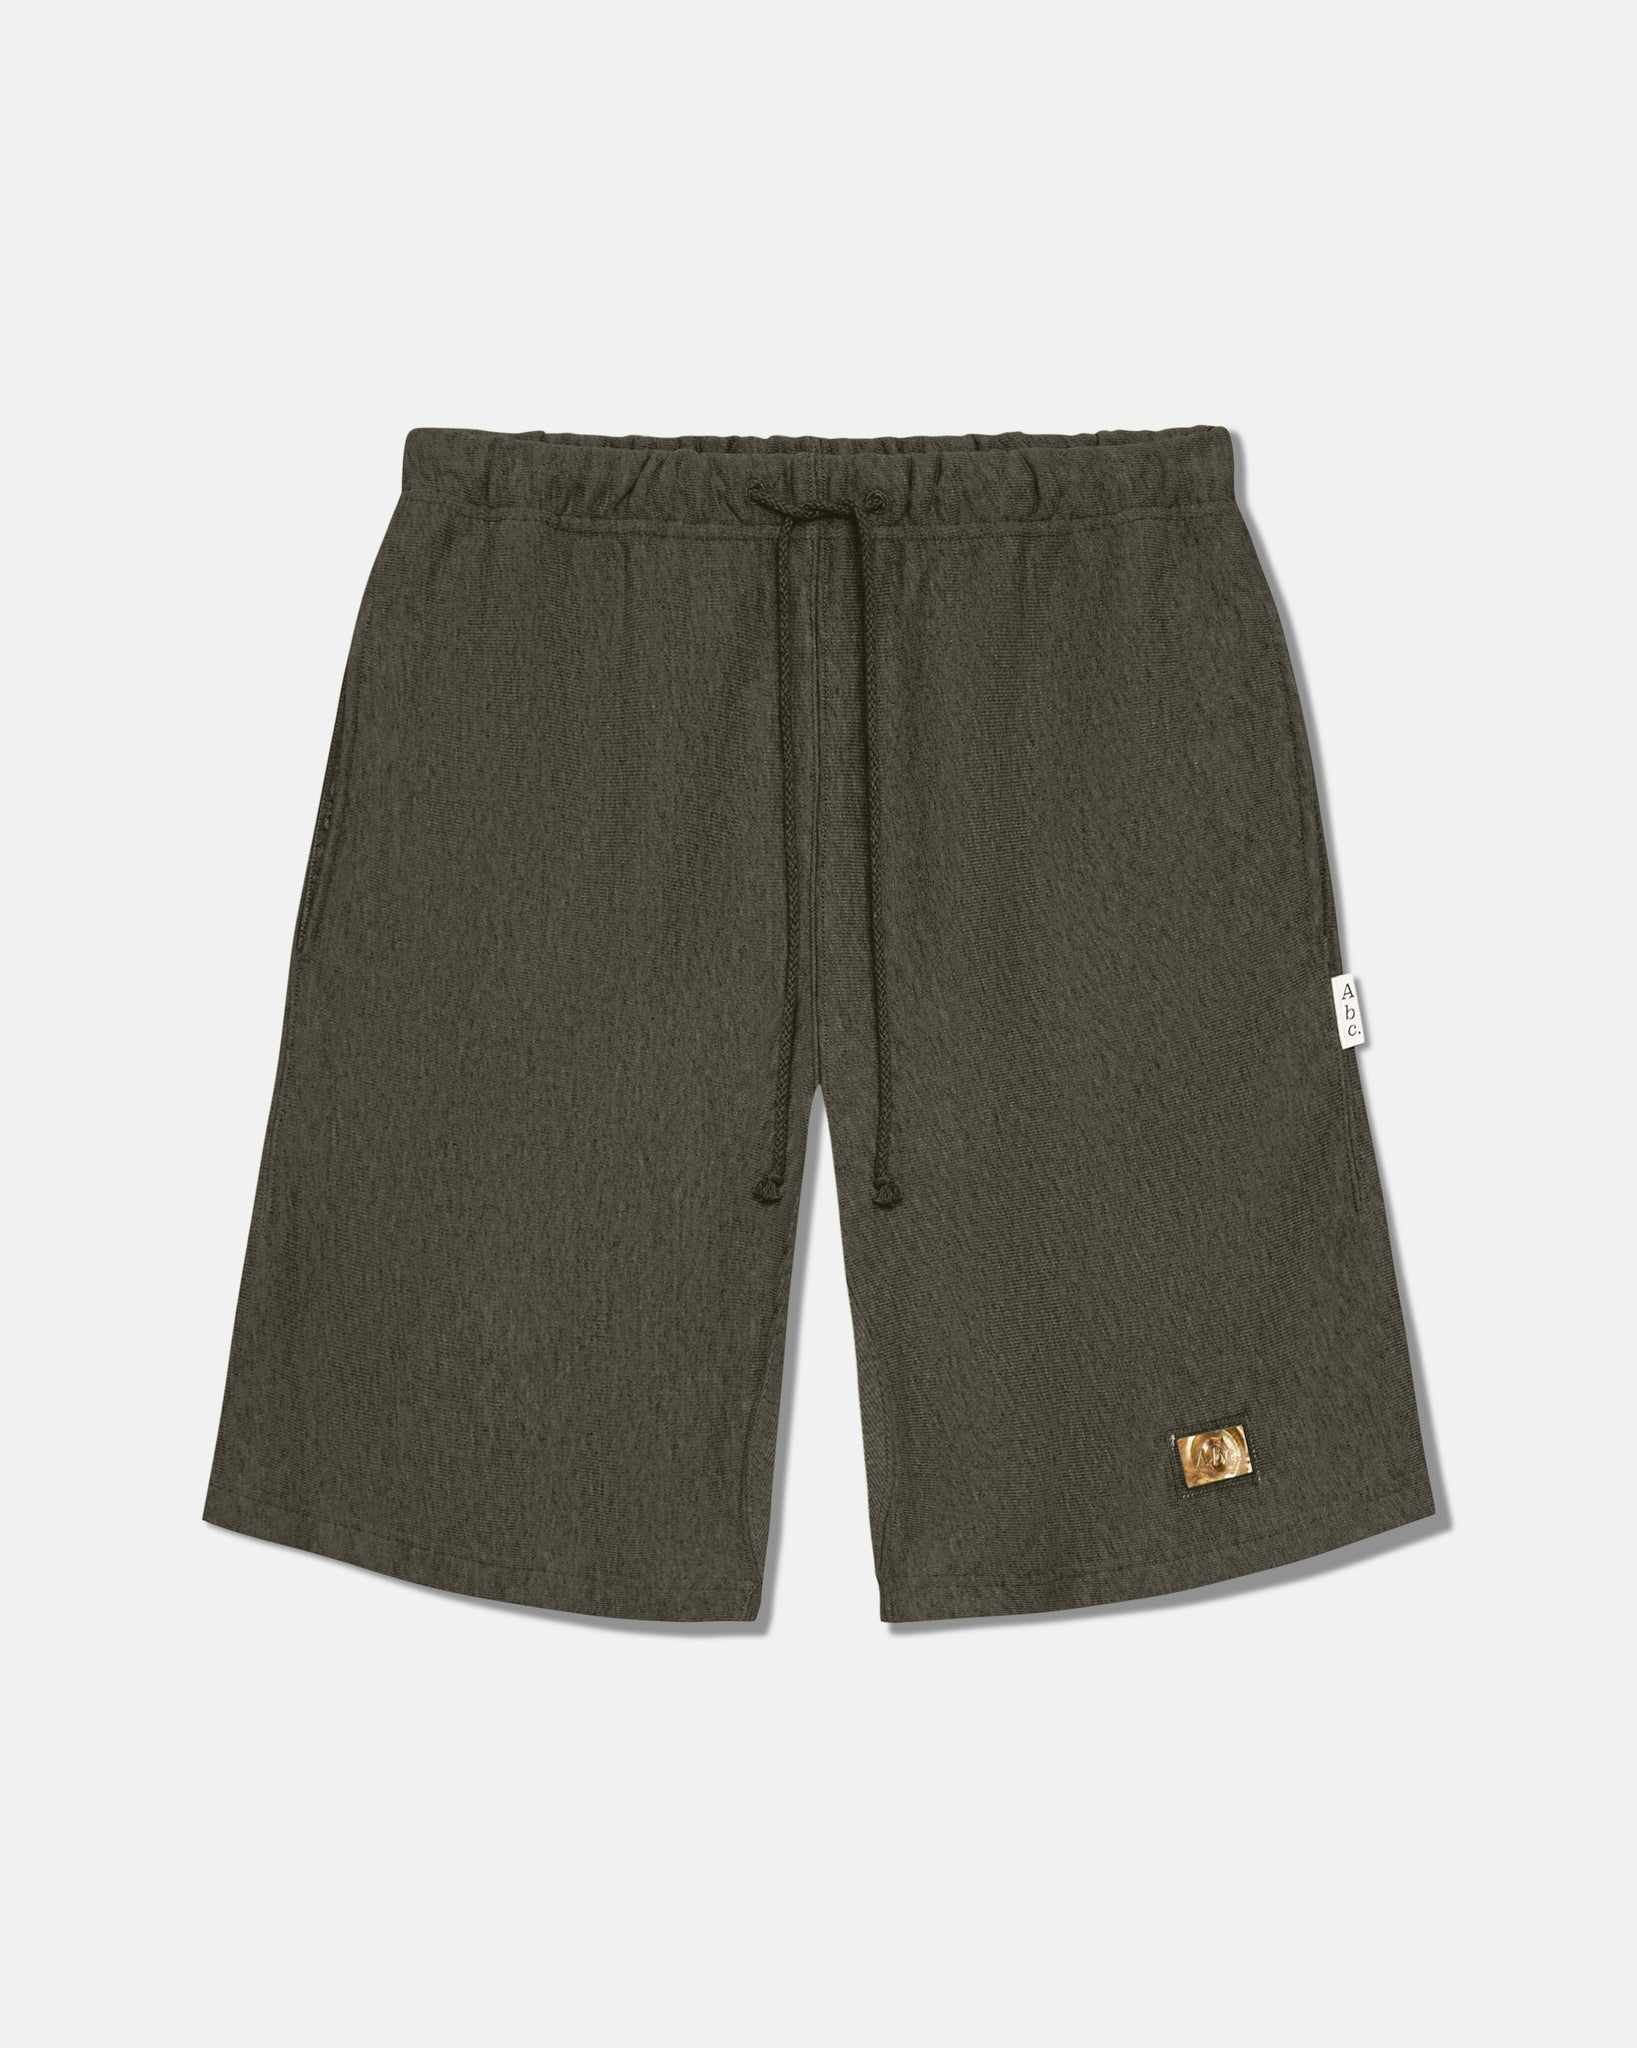 Abc. 123 Hologram French Terry Sweatshorts (SS24)- Army Green